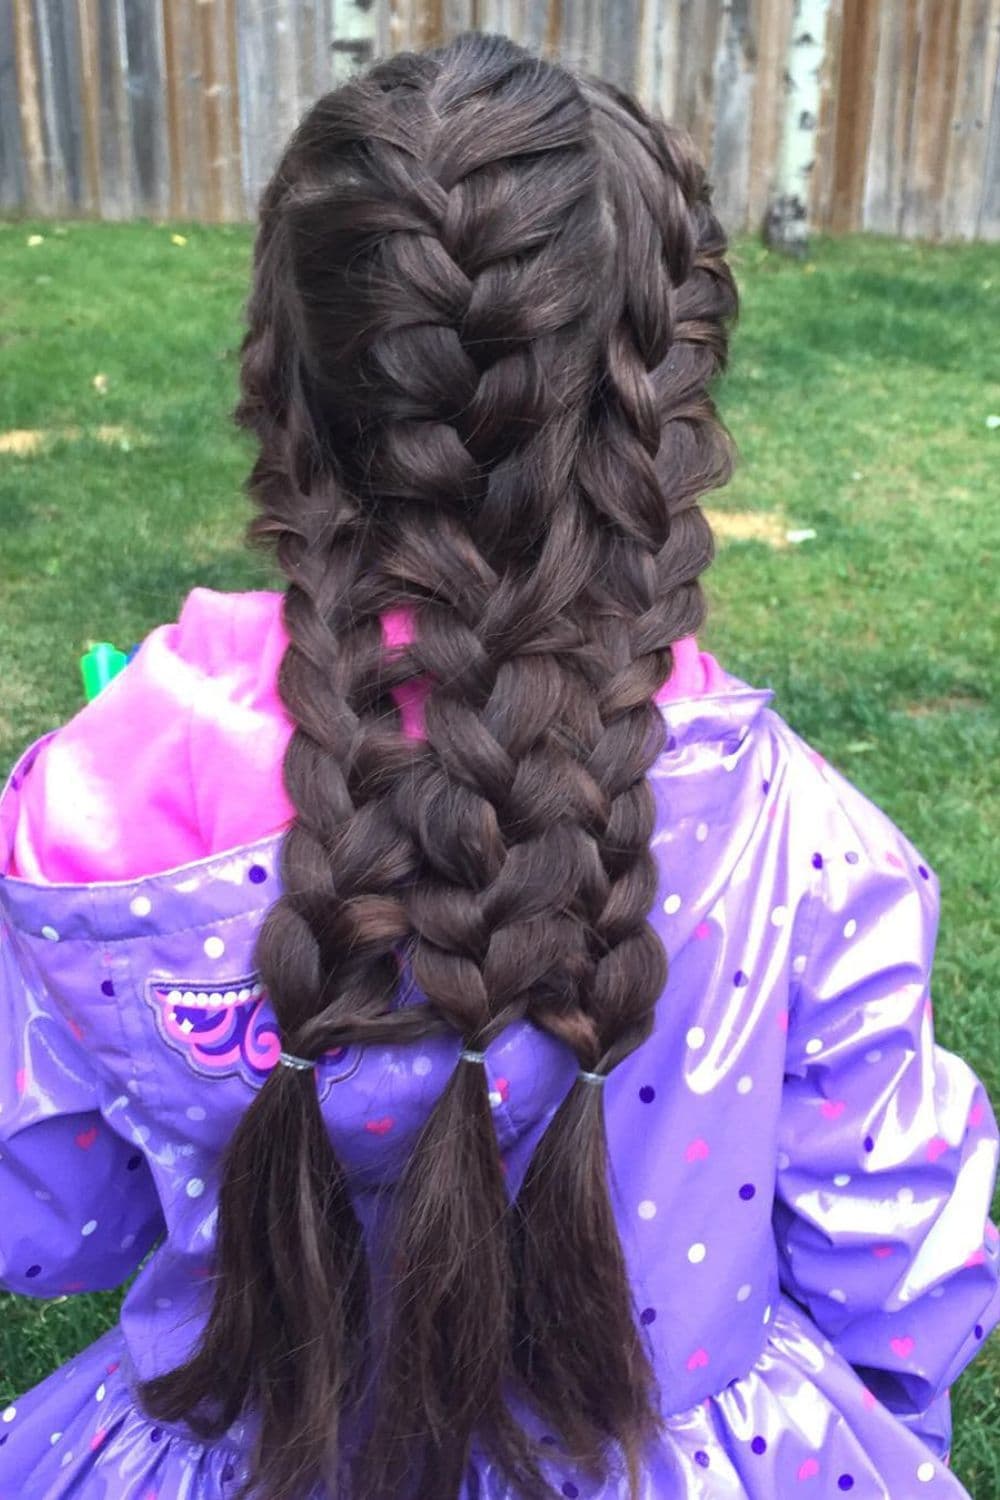 A girl wearing a purple jacket with triple French braids.